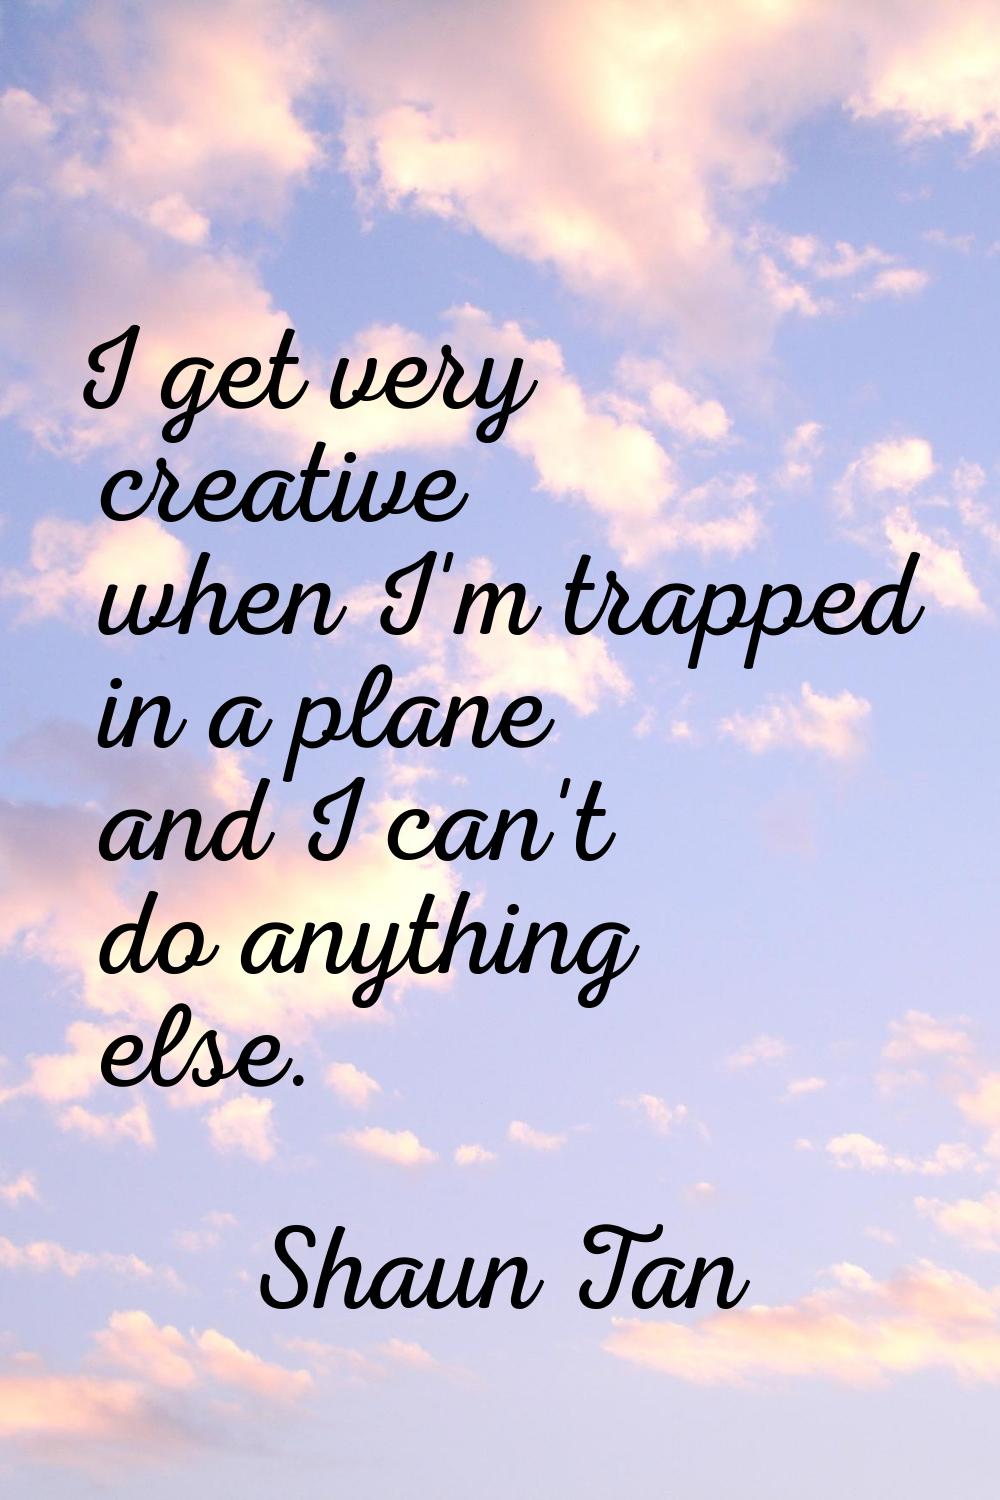 I get very creative when I'm trapped in a plane and I can't do anything else.